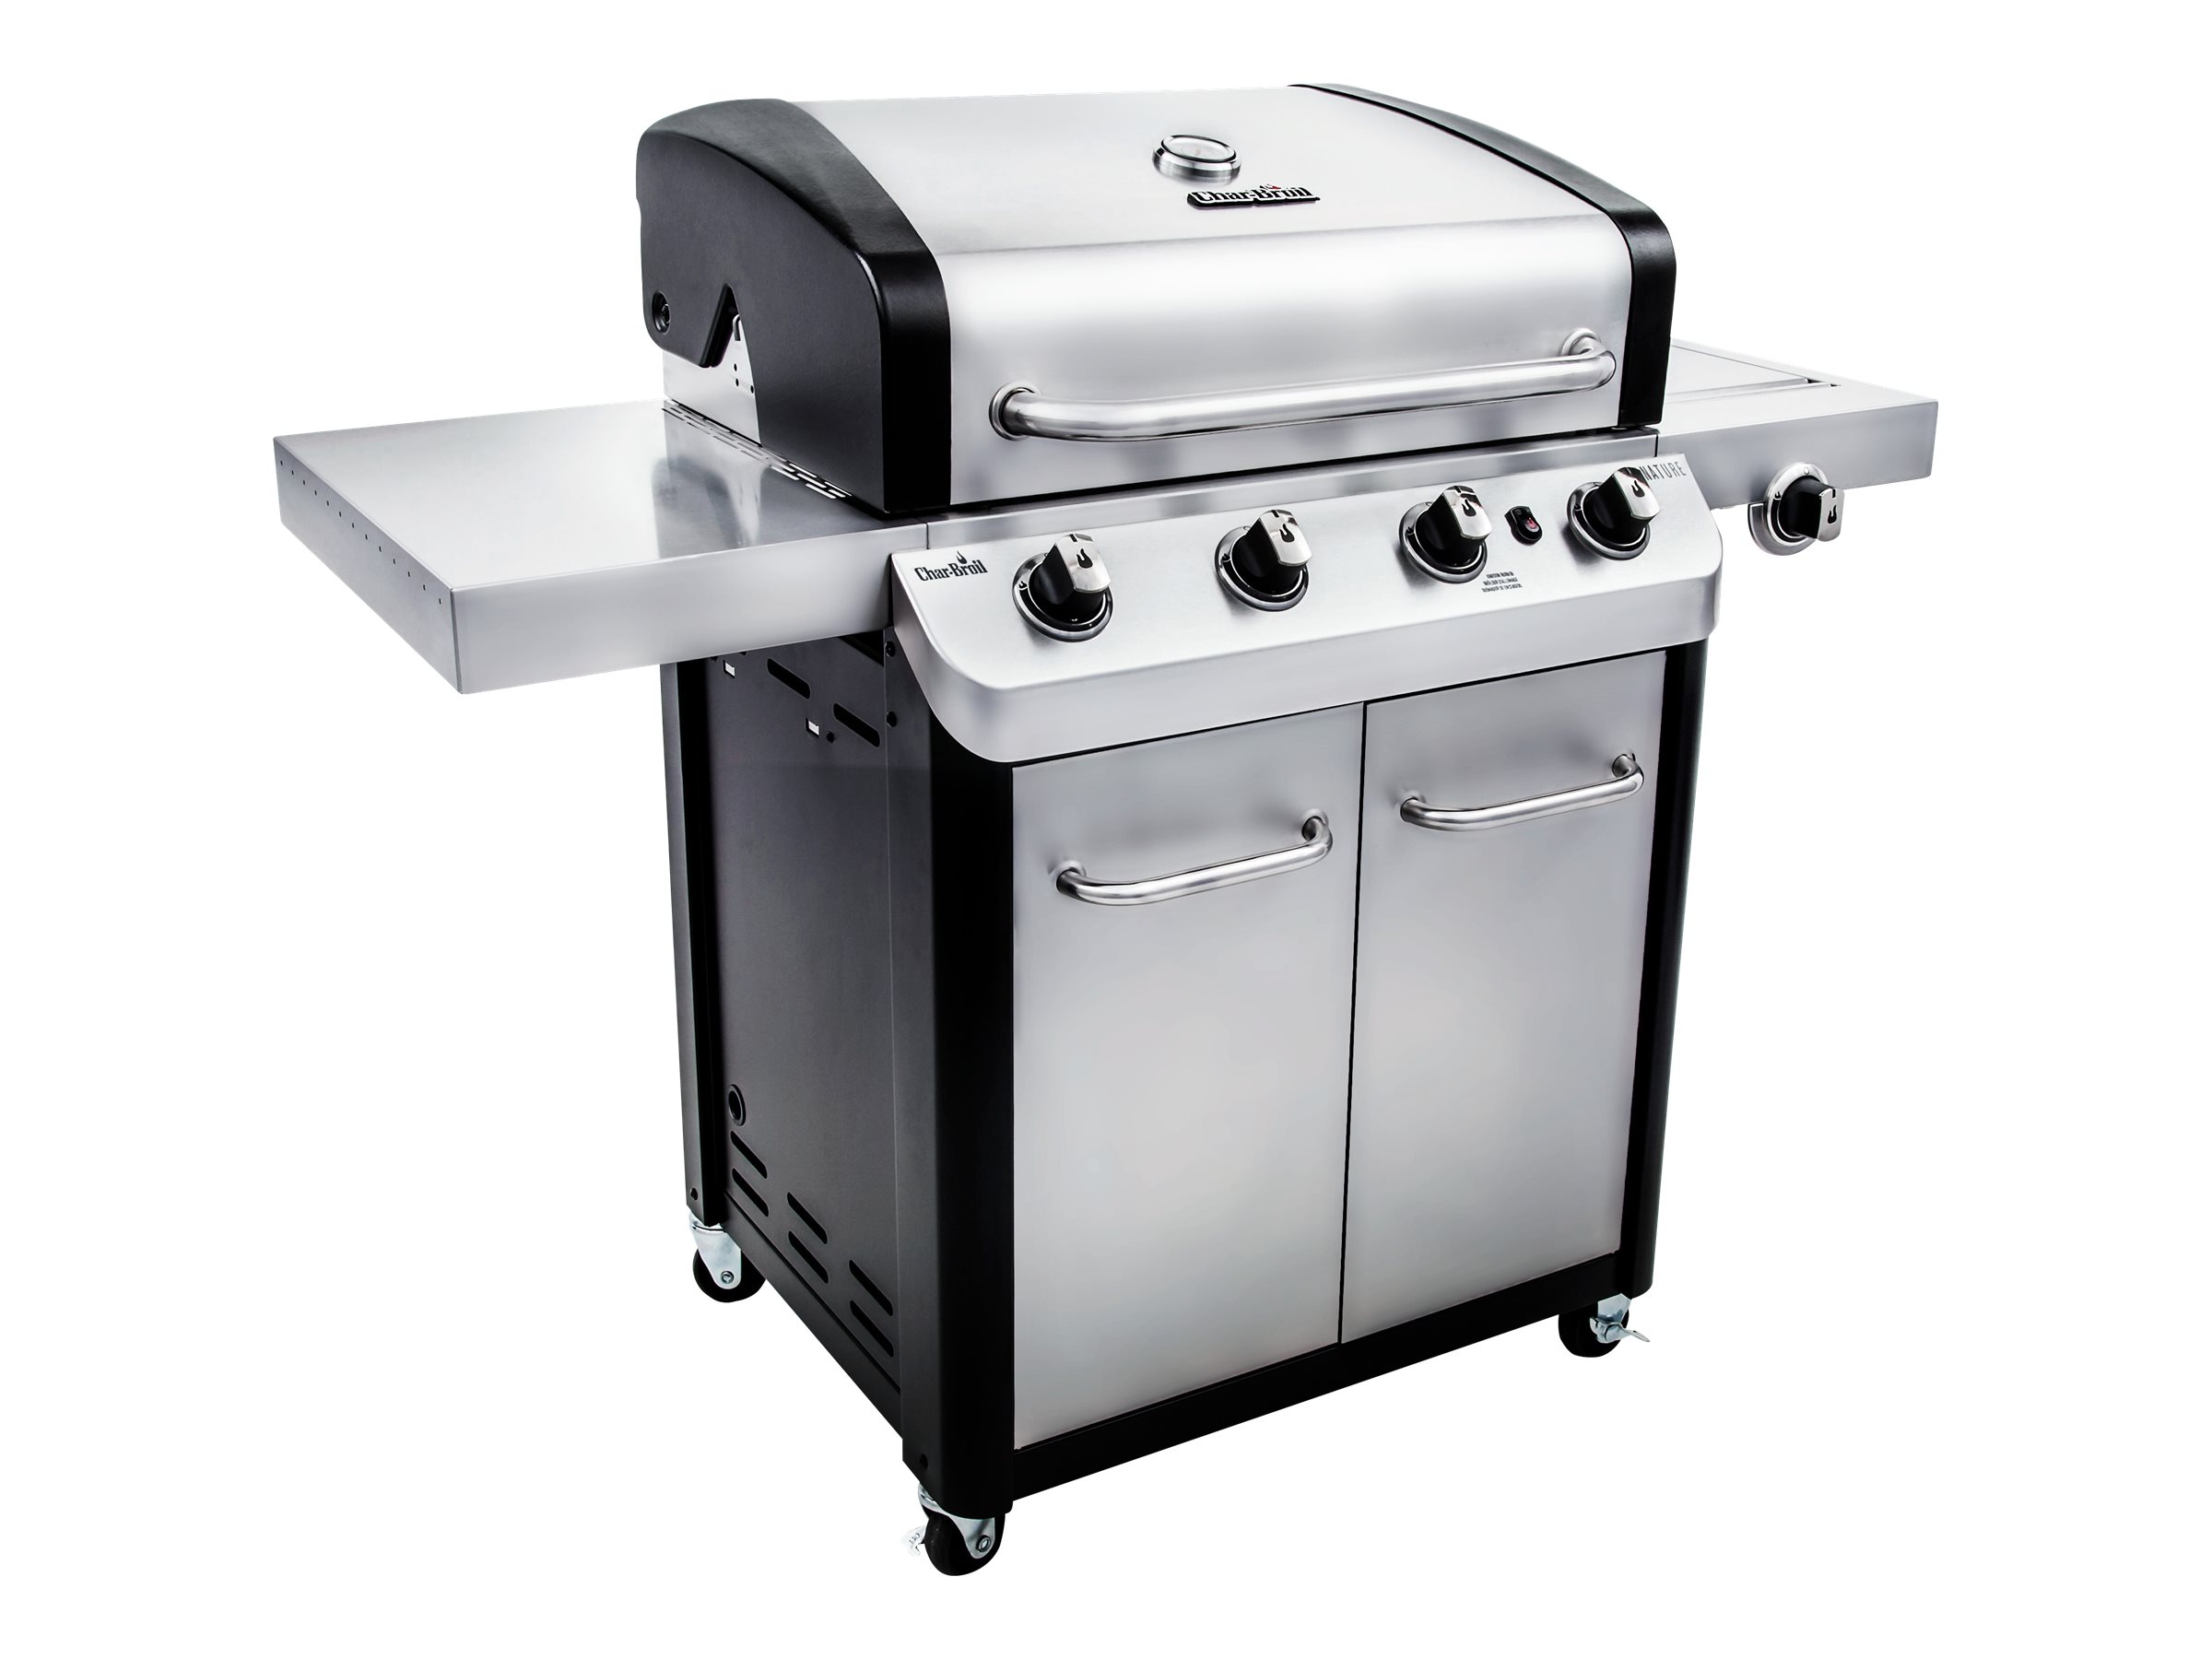 Char-Broil Signature 4-Burner Gas Grill - image 3 of 11